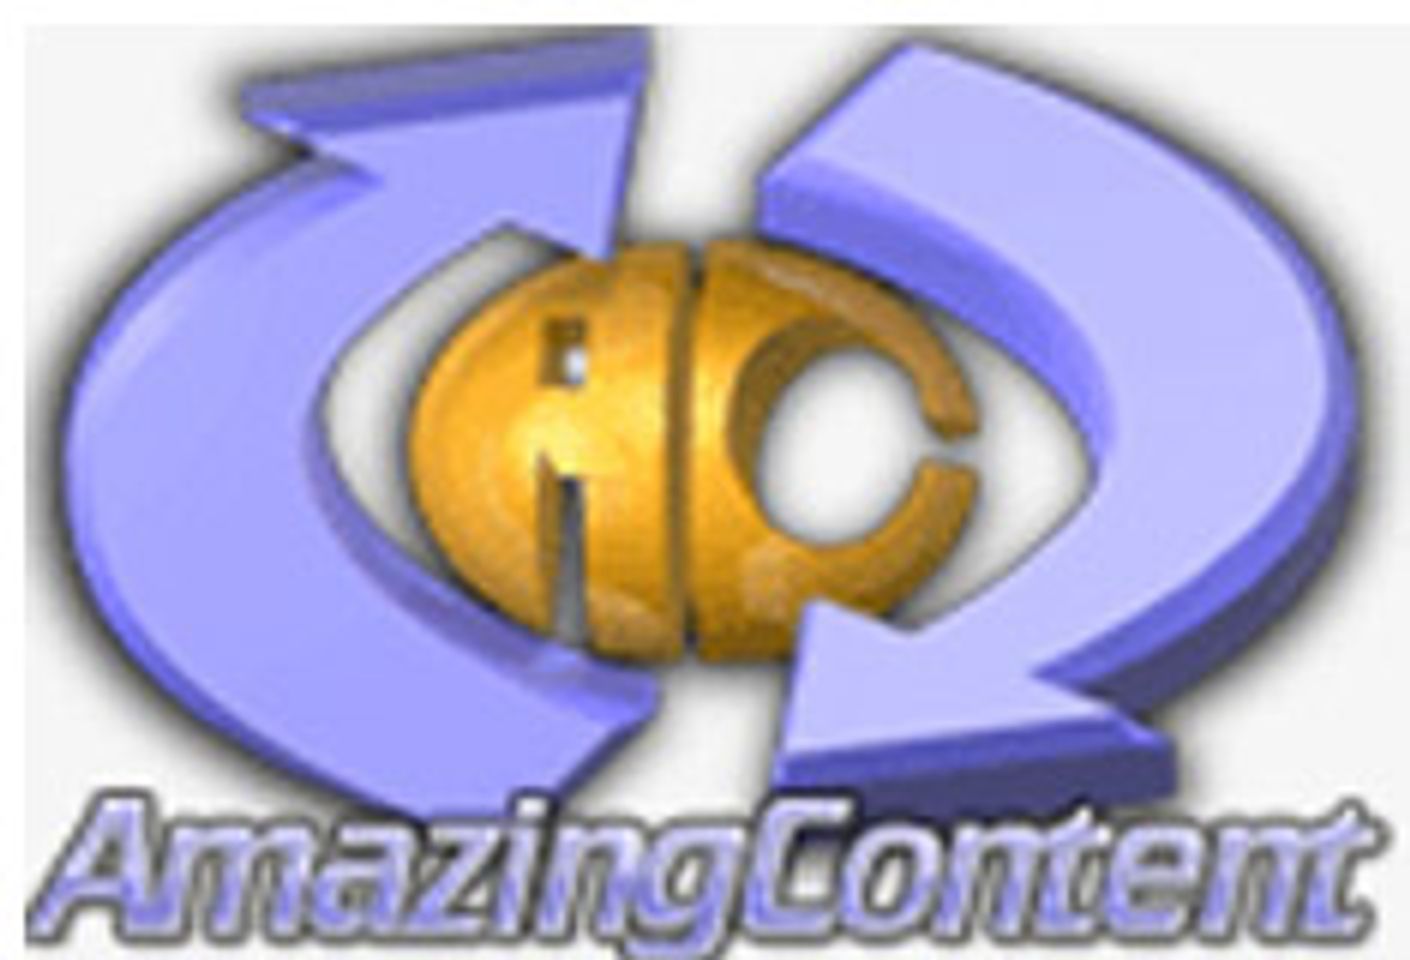 Amazing Content Expands, Offering Free Content Upgrade for Existing Clients